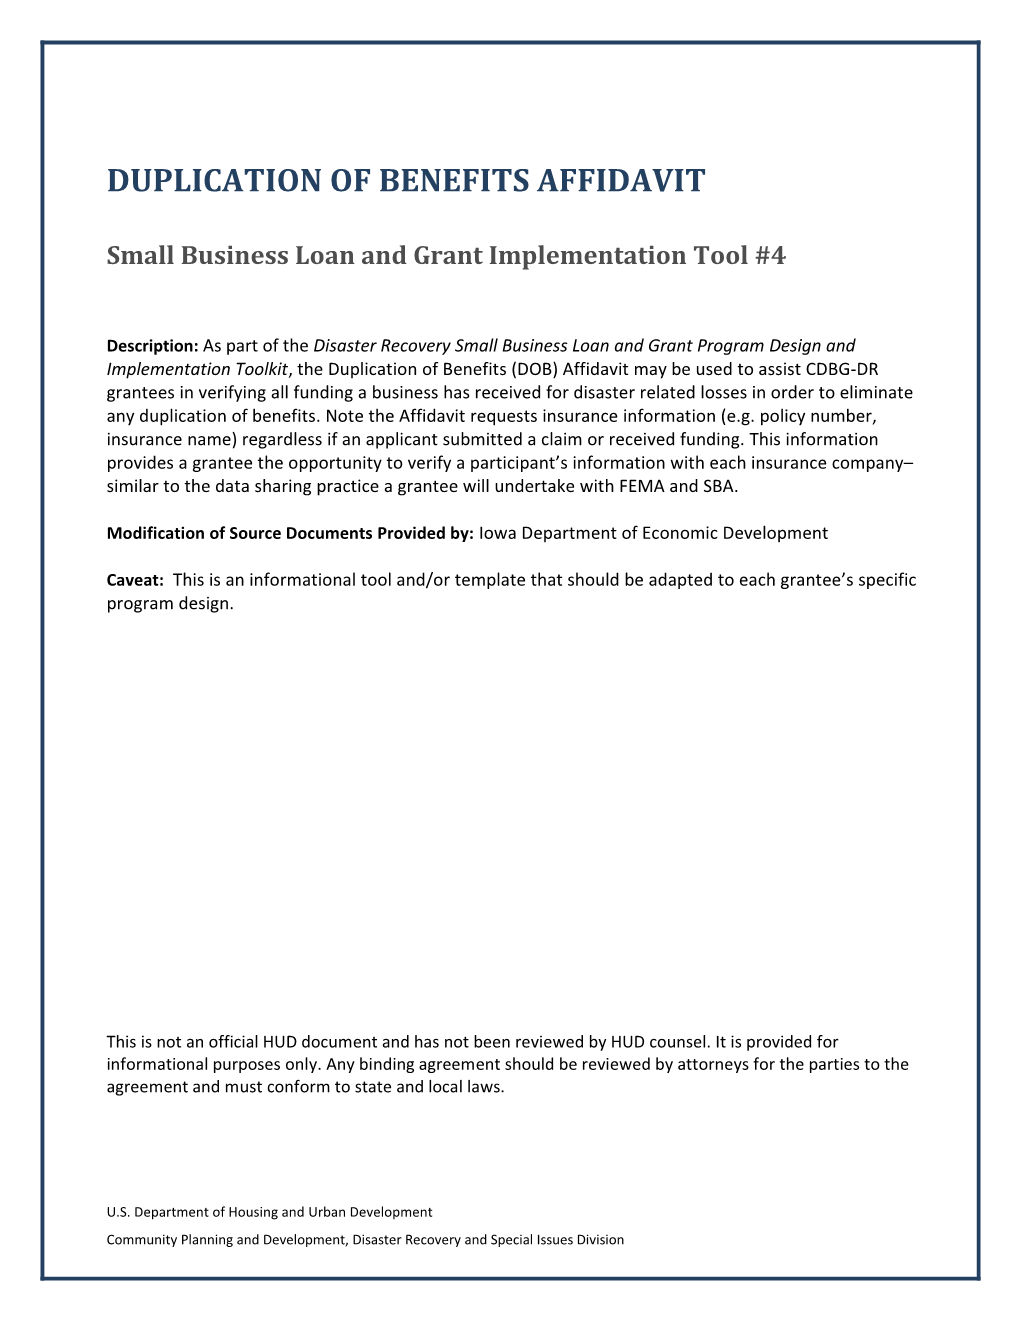 CDBG-DR Small Business Loan and Grant Duplication of Benefits Affidavit